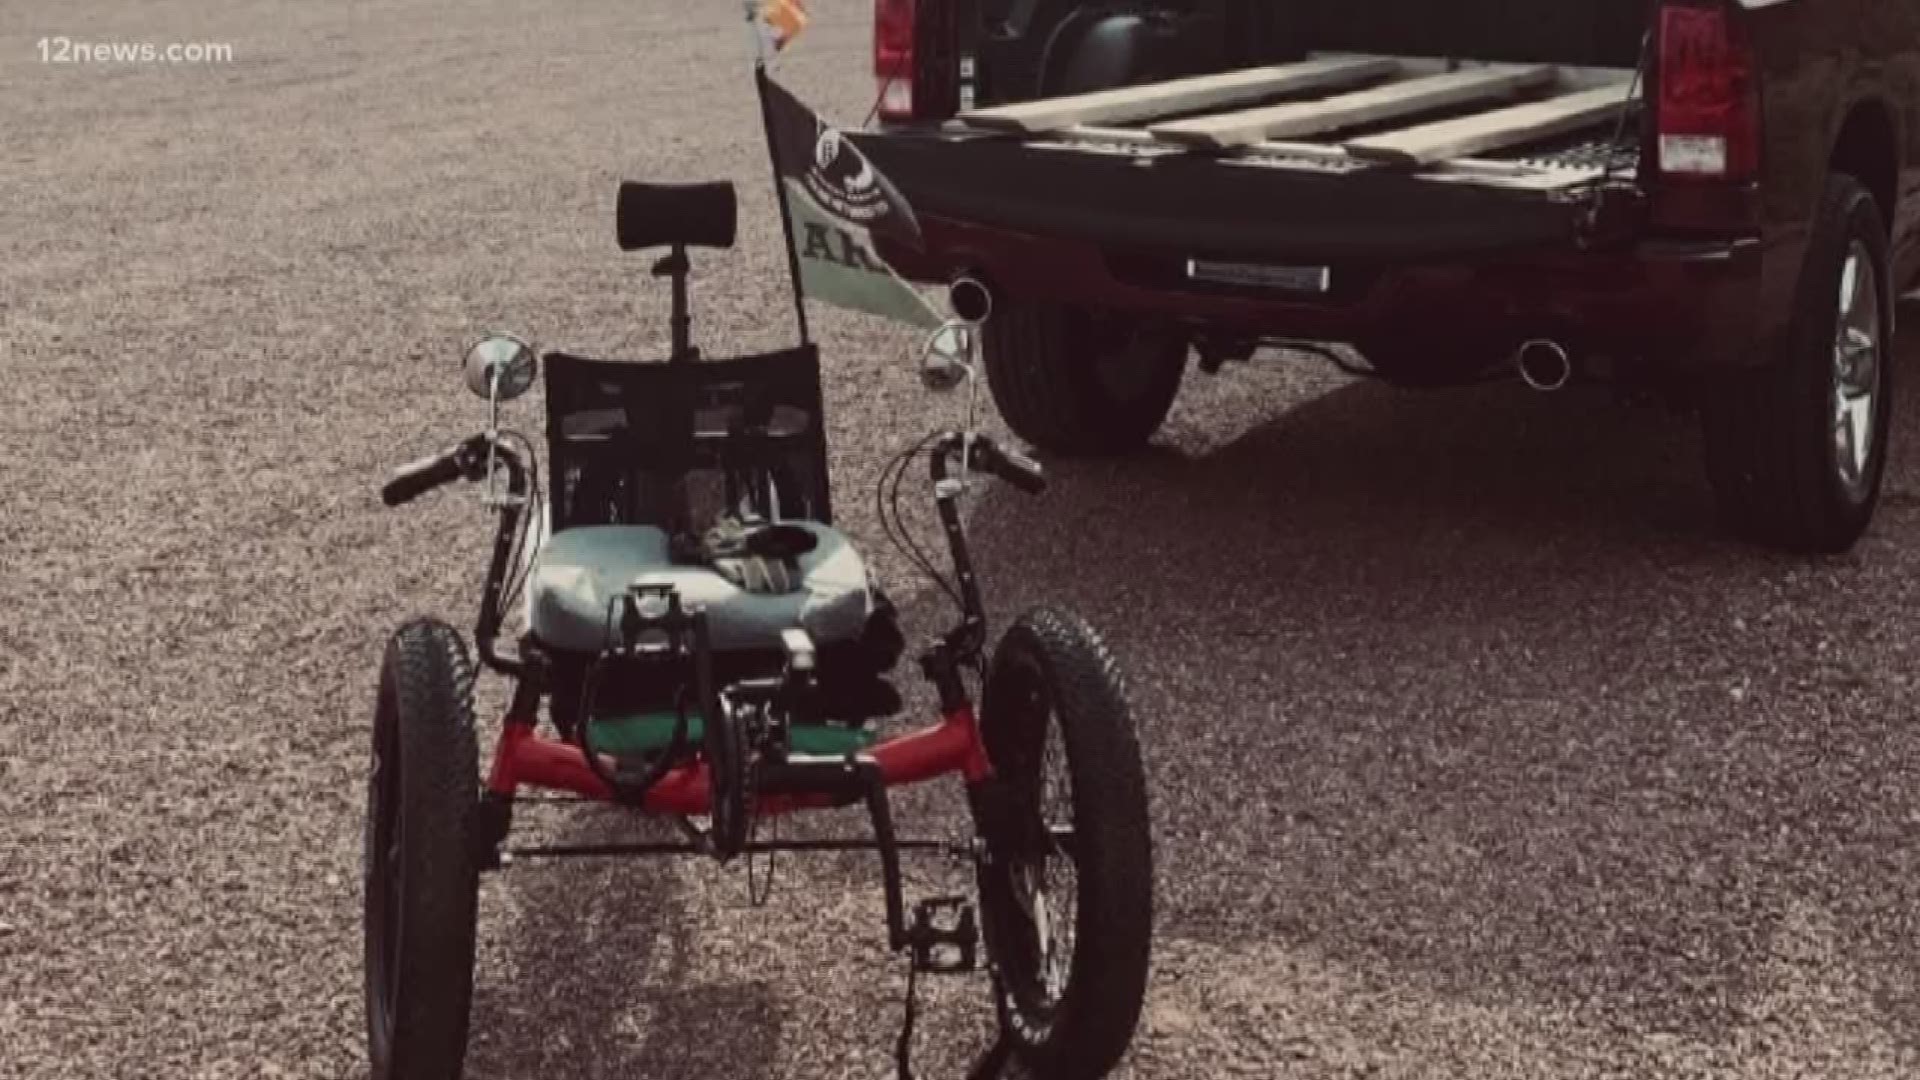 James Finlay lights up when he talks his specialized trike, a trike that helps his back feel better. At an event over the weekend the trike was stolen before he could present it to other veterans as a way to battle depression. Here are some ways you can help James.